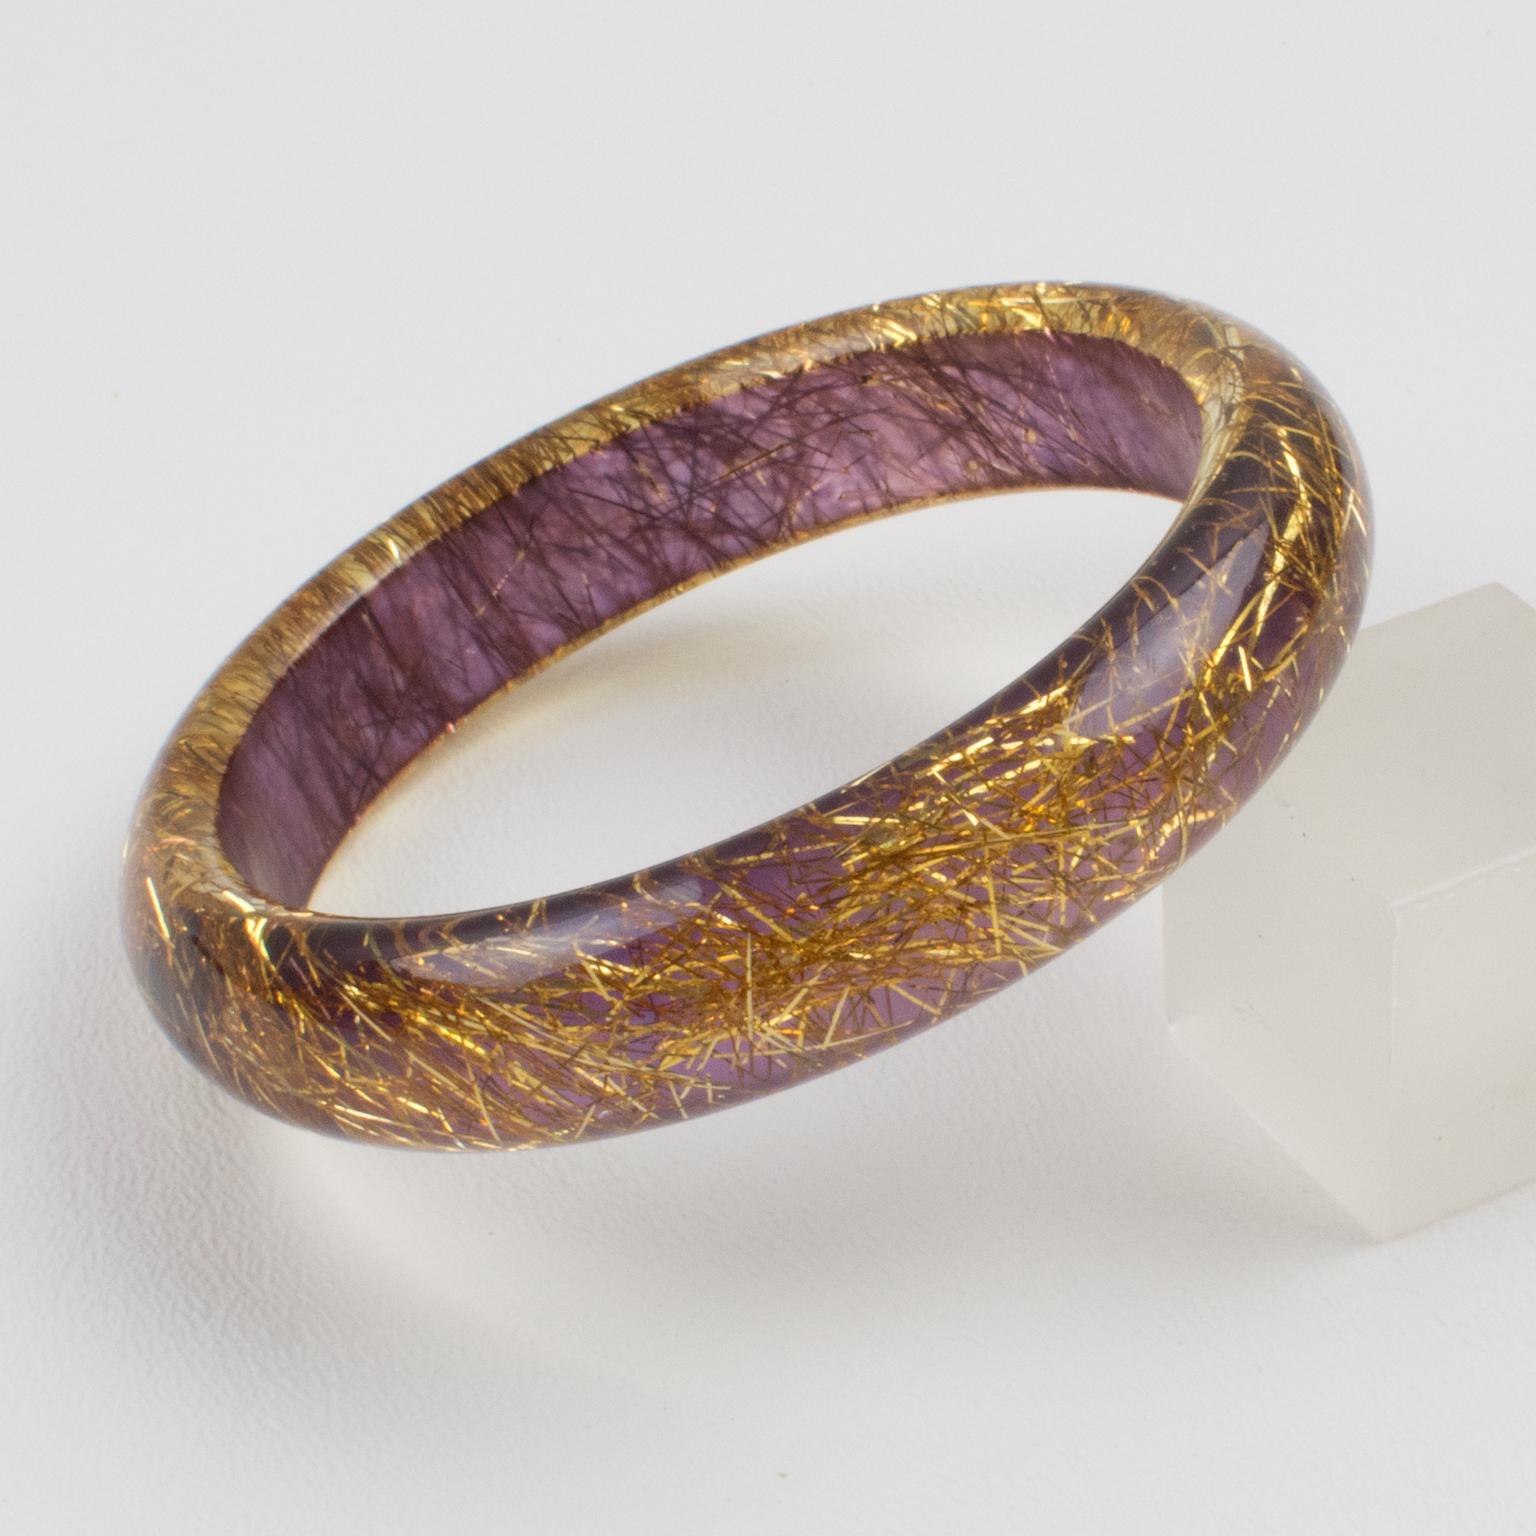 Lovely Lucite bracelet bangle. The bangle has a domed shape and is comprised of clear Lucite which is injected with metallic thread inclusions in gold color with a lavender purple background. The metallic threads sparkle like those of Christmas